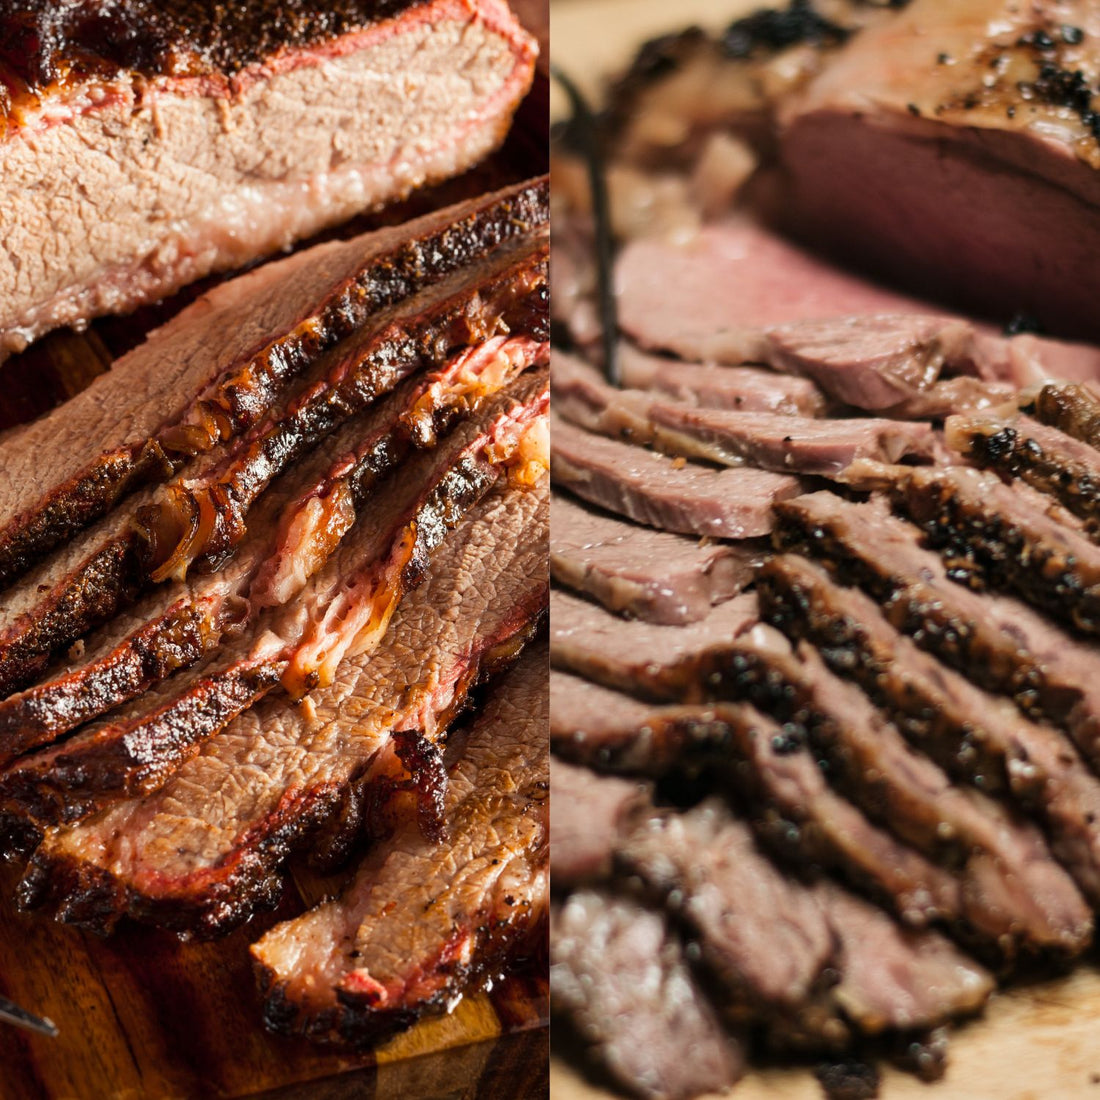 cooked brisket next to cooked roast beef to demonstrate brisket vs chuck roast